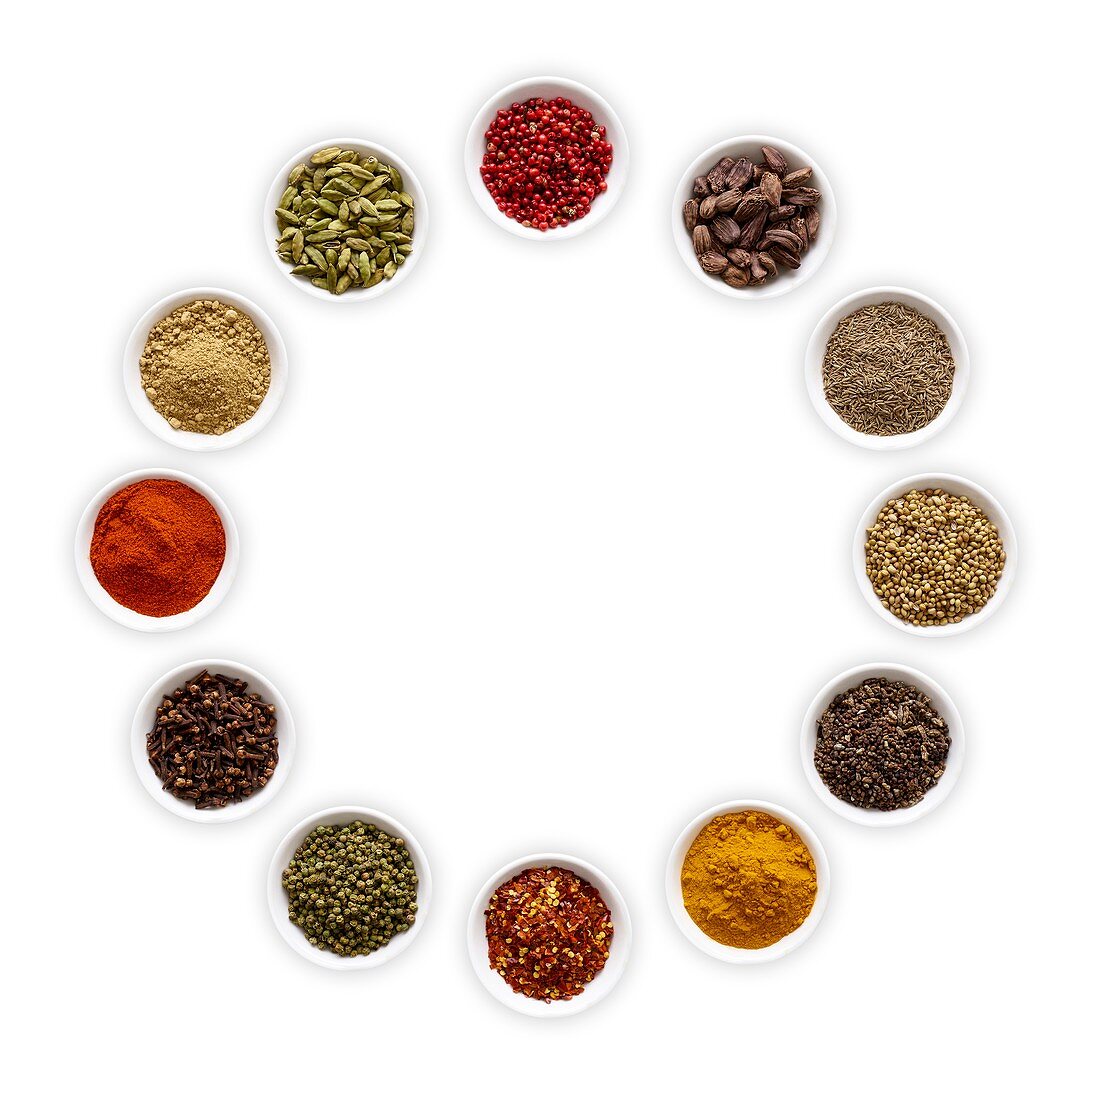 Dried spices in small bowls